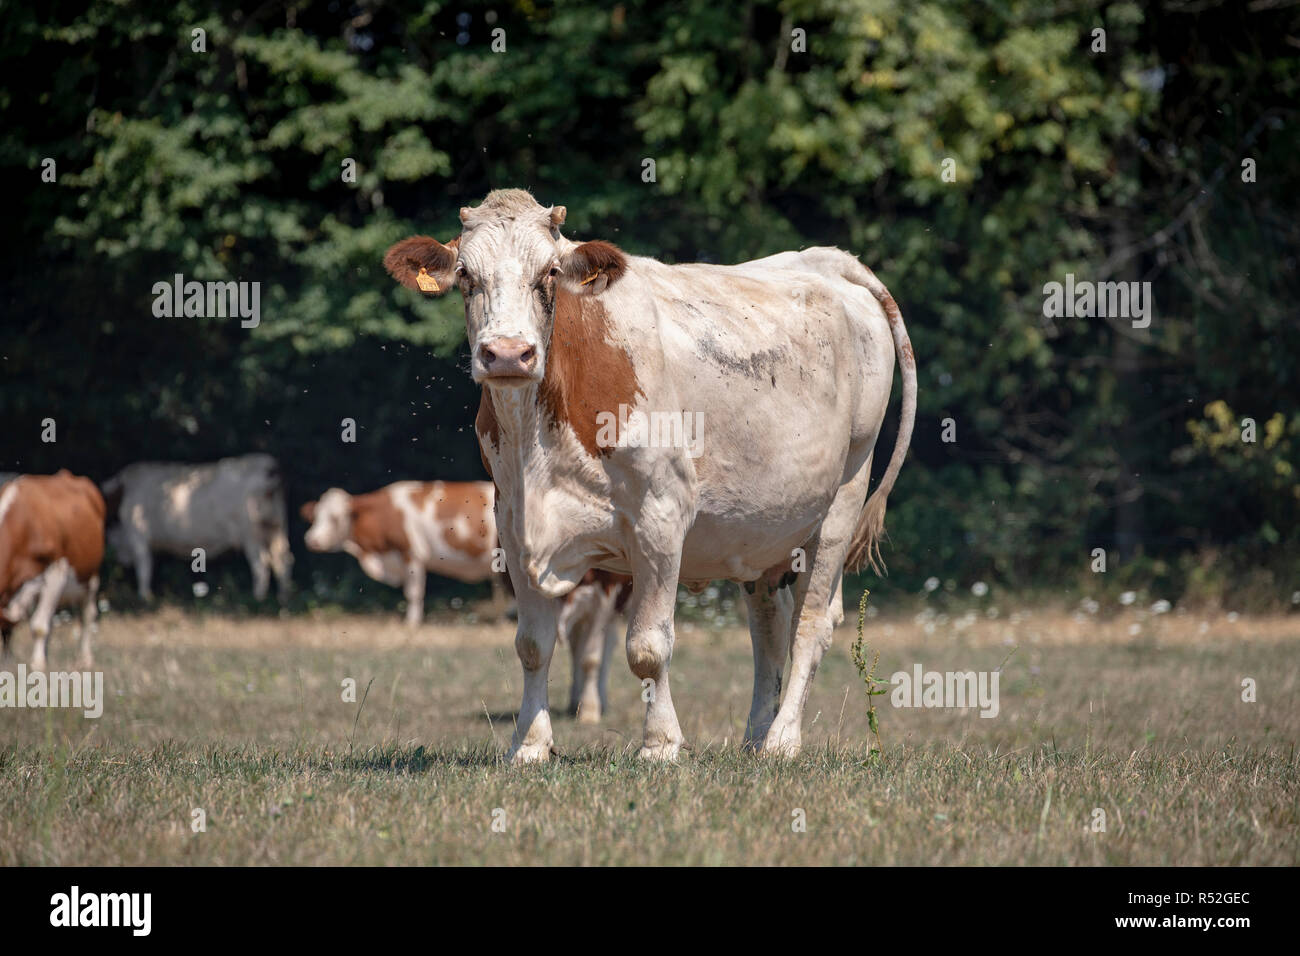 Red and white cow, breed of cattle Montbeliard, in the Jura, France, standing in the middle of a dry meadow, pasture, with at the background trees and Stock Photo